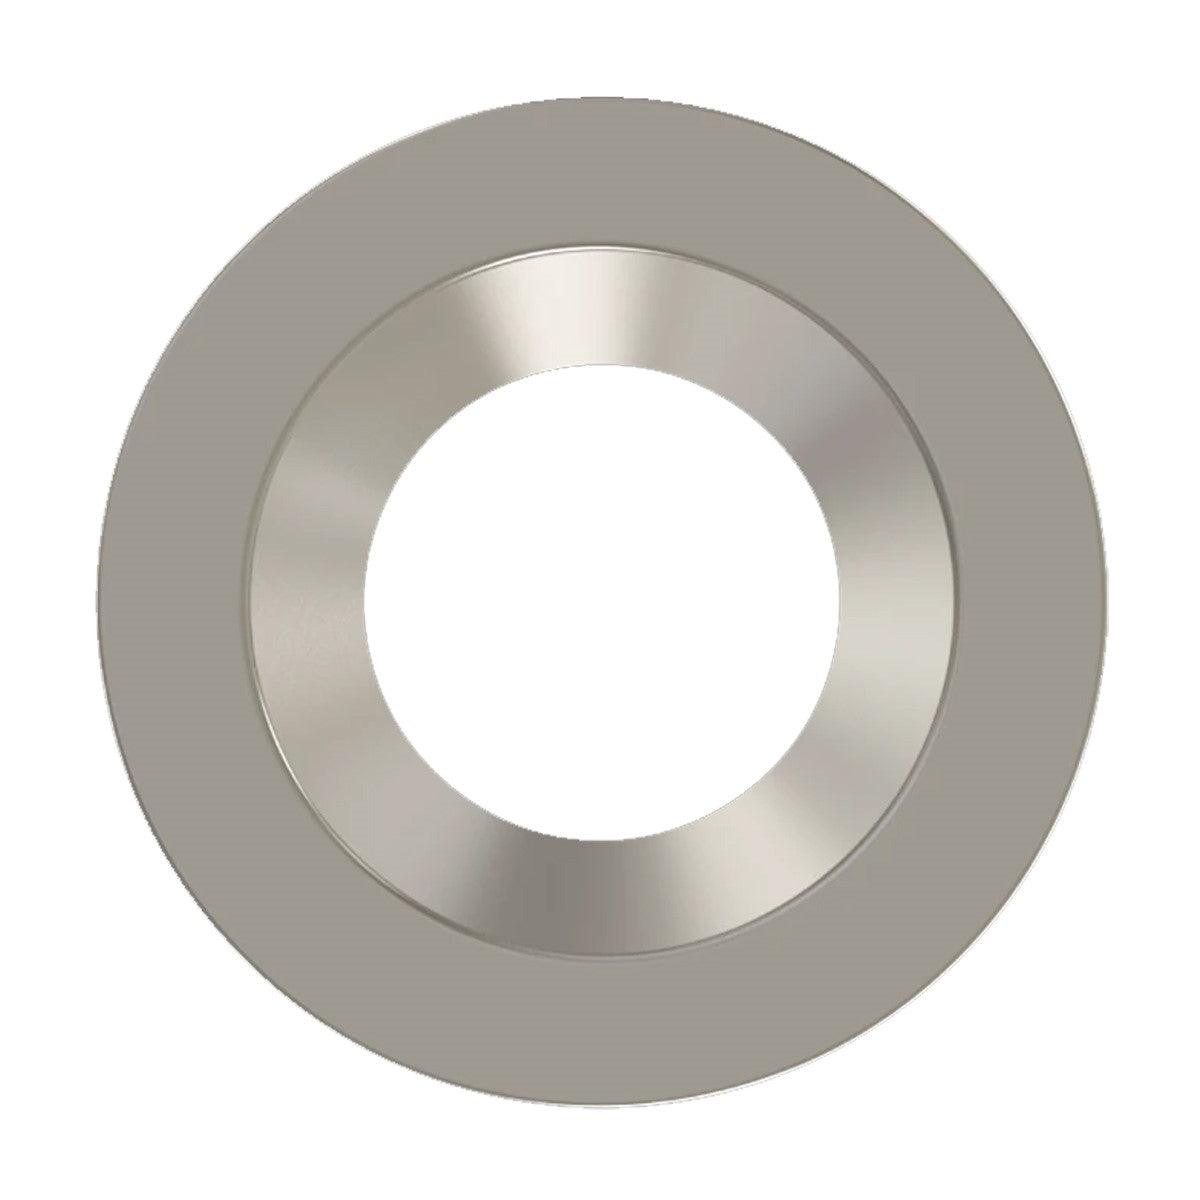 RAB 4 Inch Round Brushed Nickel / Smooth Trim for HA4 Series